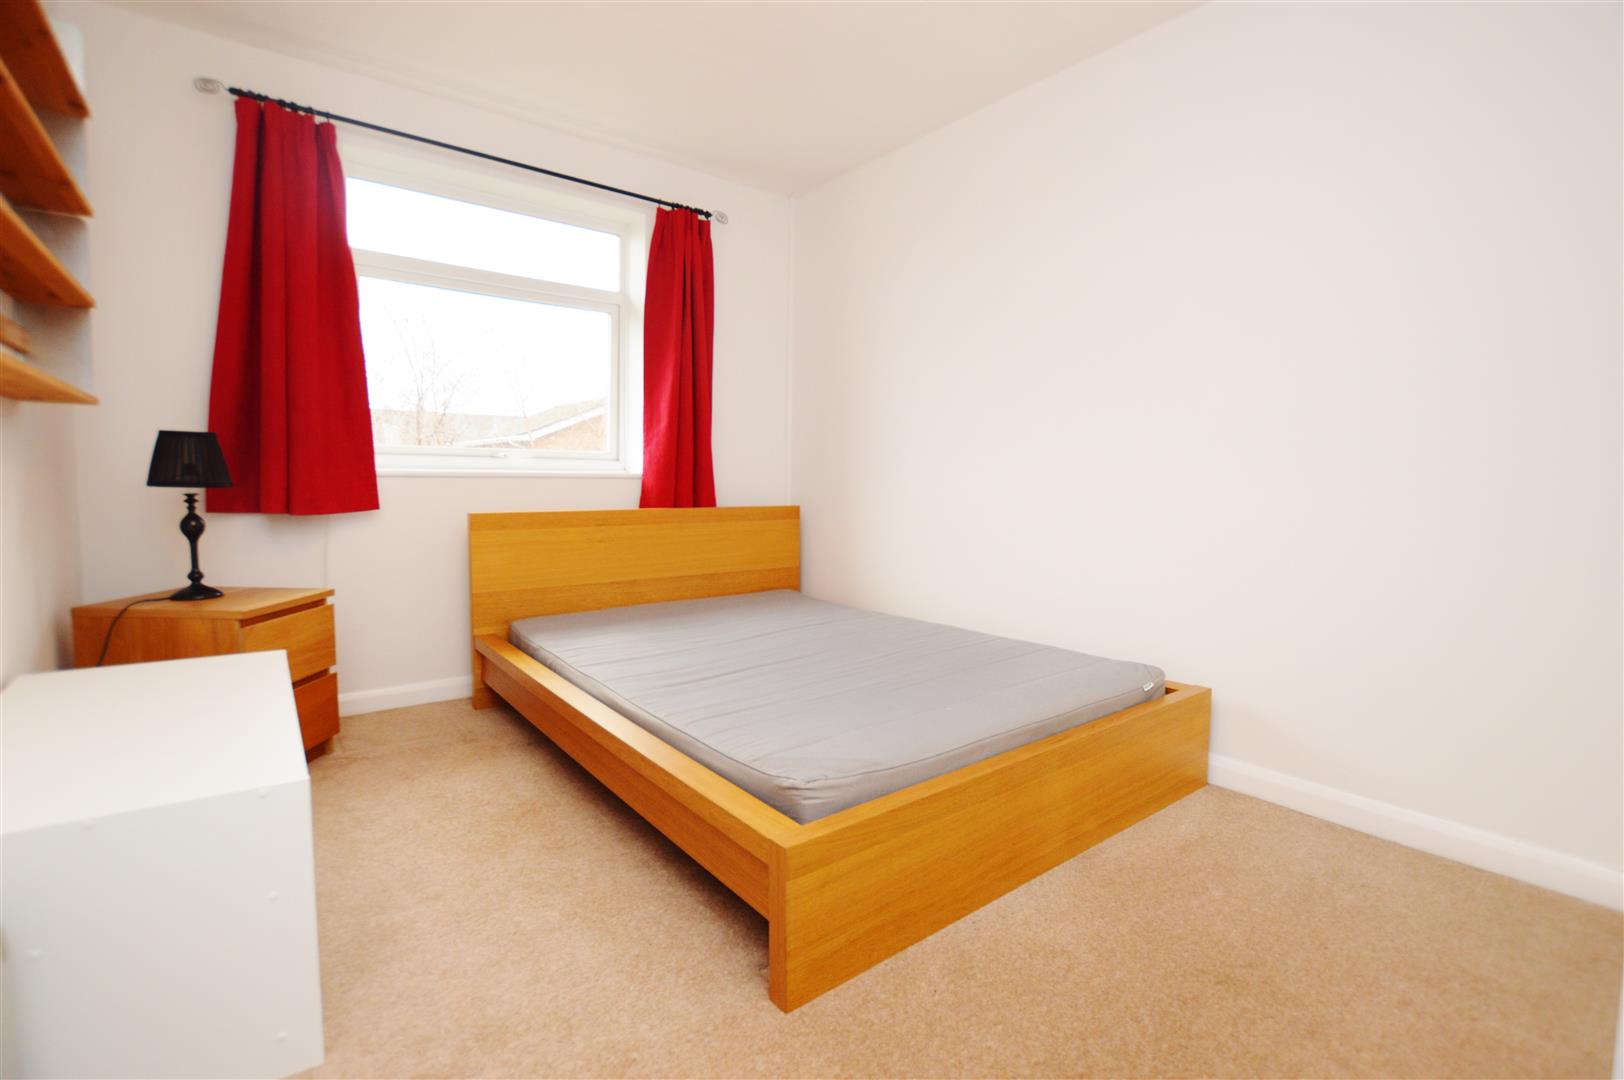 Valerie Court Bath Road Apartment to let in Reading